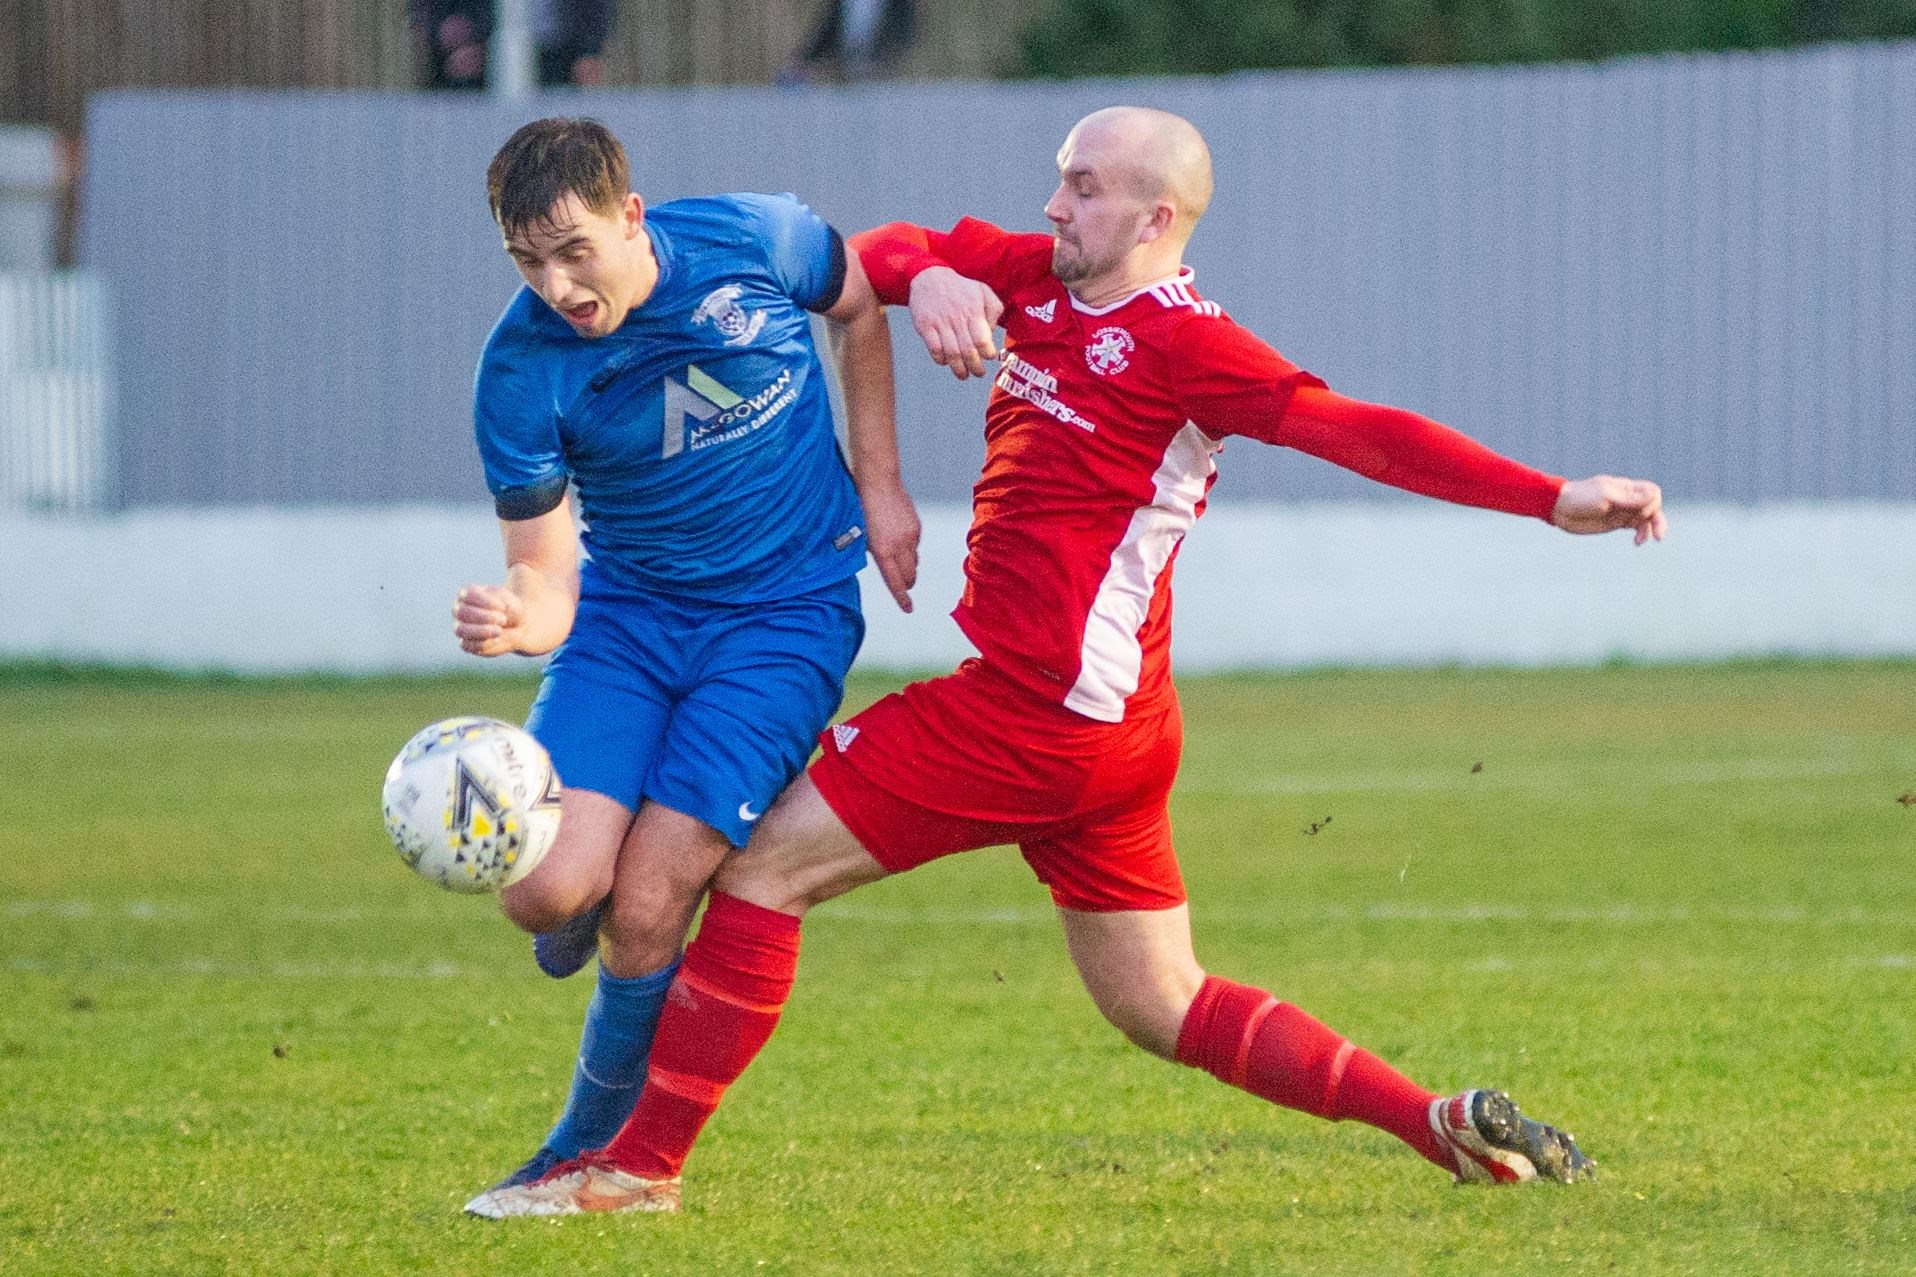 Lossiemouth FC's Connor Macaulay goes in for a solid challenge on Strathspey Jag James McShane. ..Lossiemouth FC (0) vs Strathspey Thistle FC (2) - Highland Football League - Grant Park Lossiemouth 04/01/2020 ...Picture: Daniel Forsyth..